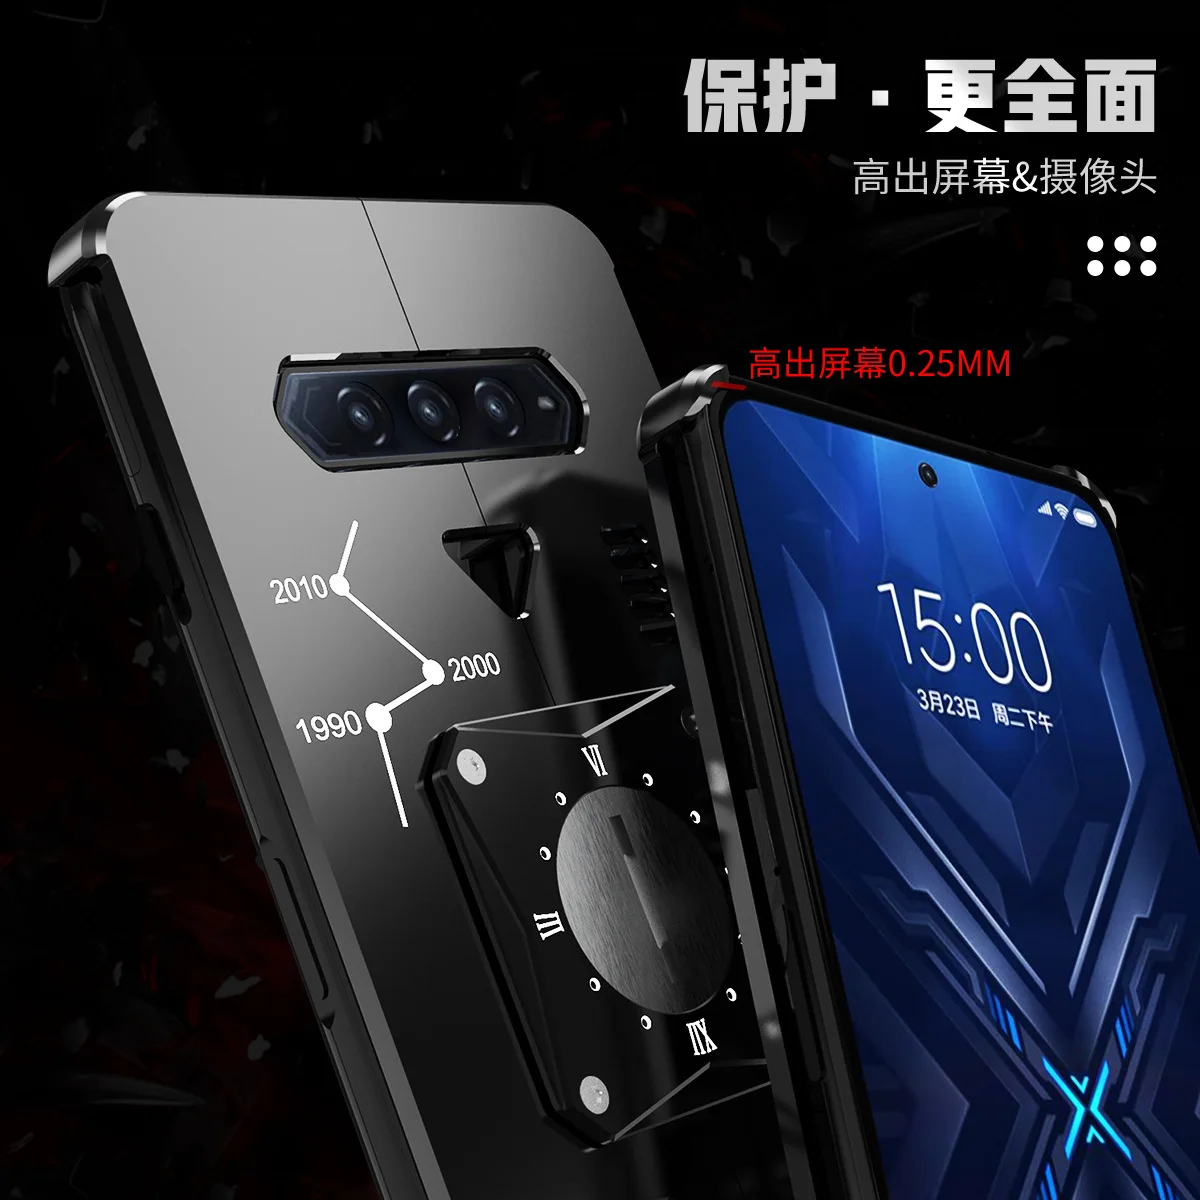 original metal luxury new thor heavy duty armor metal aluminum phone case for xiaomi black shark 4 3 3s 2 pro cases cover free global shipping